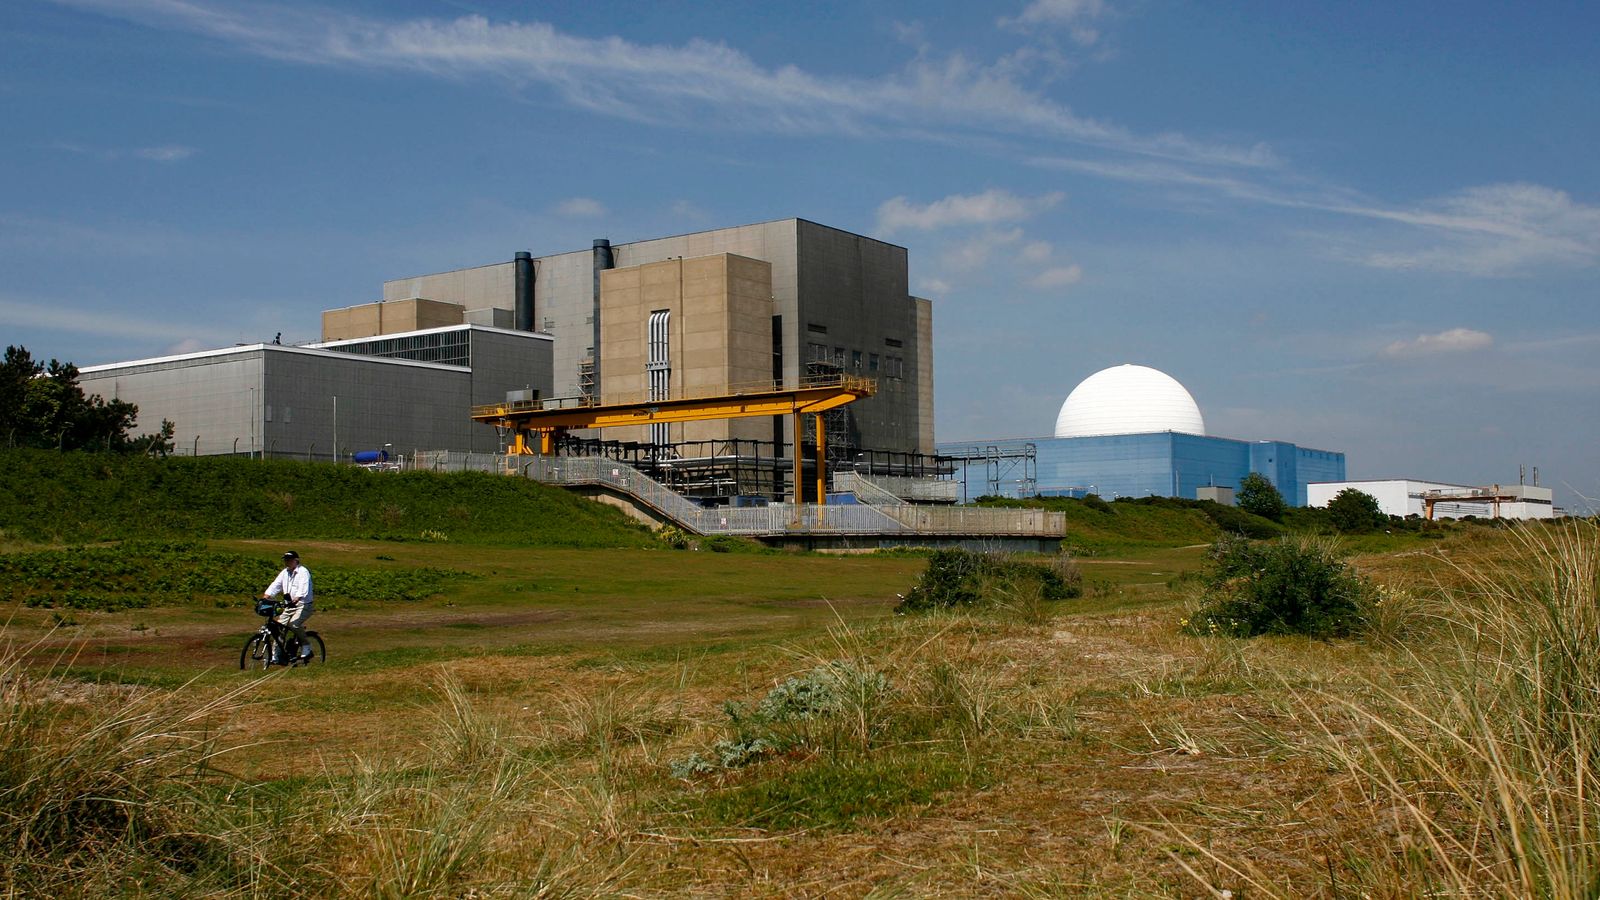 Sizewell C: New nuclear power station granted development consent by the government